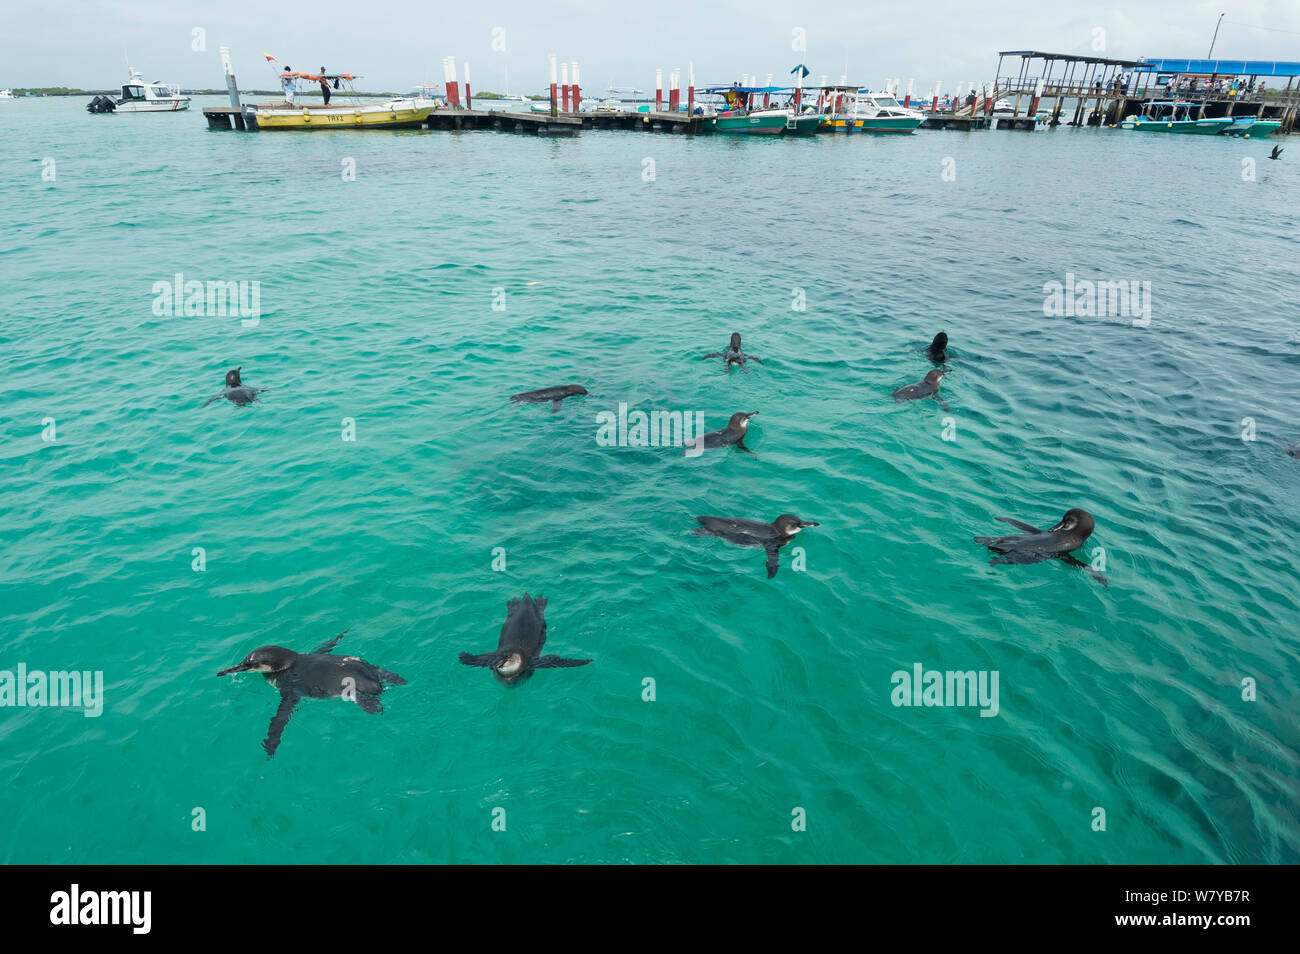 Galapagos penguins (Spheniscus mendiculus) swimming near jetty and boats, Galapagos, Ecuador. Endangered species. Stock Photo